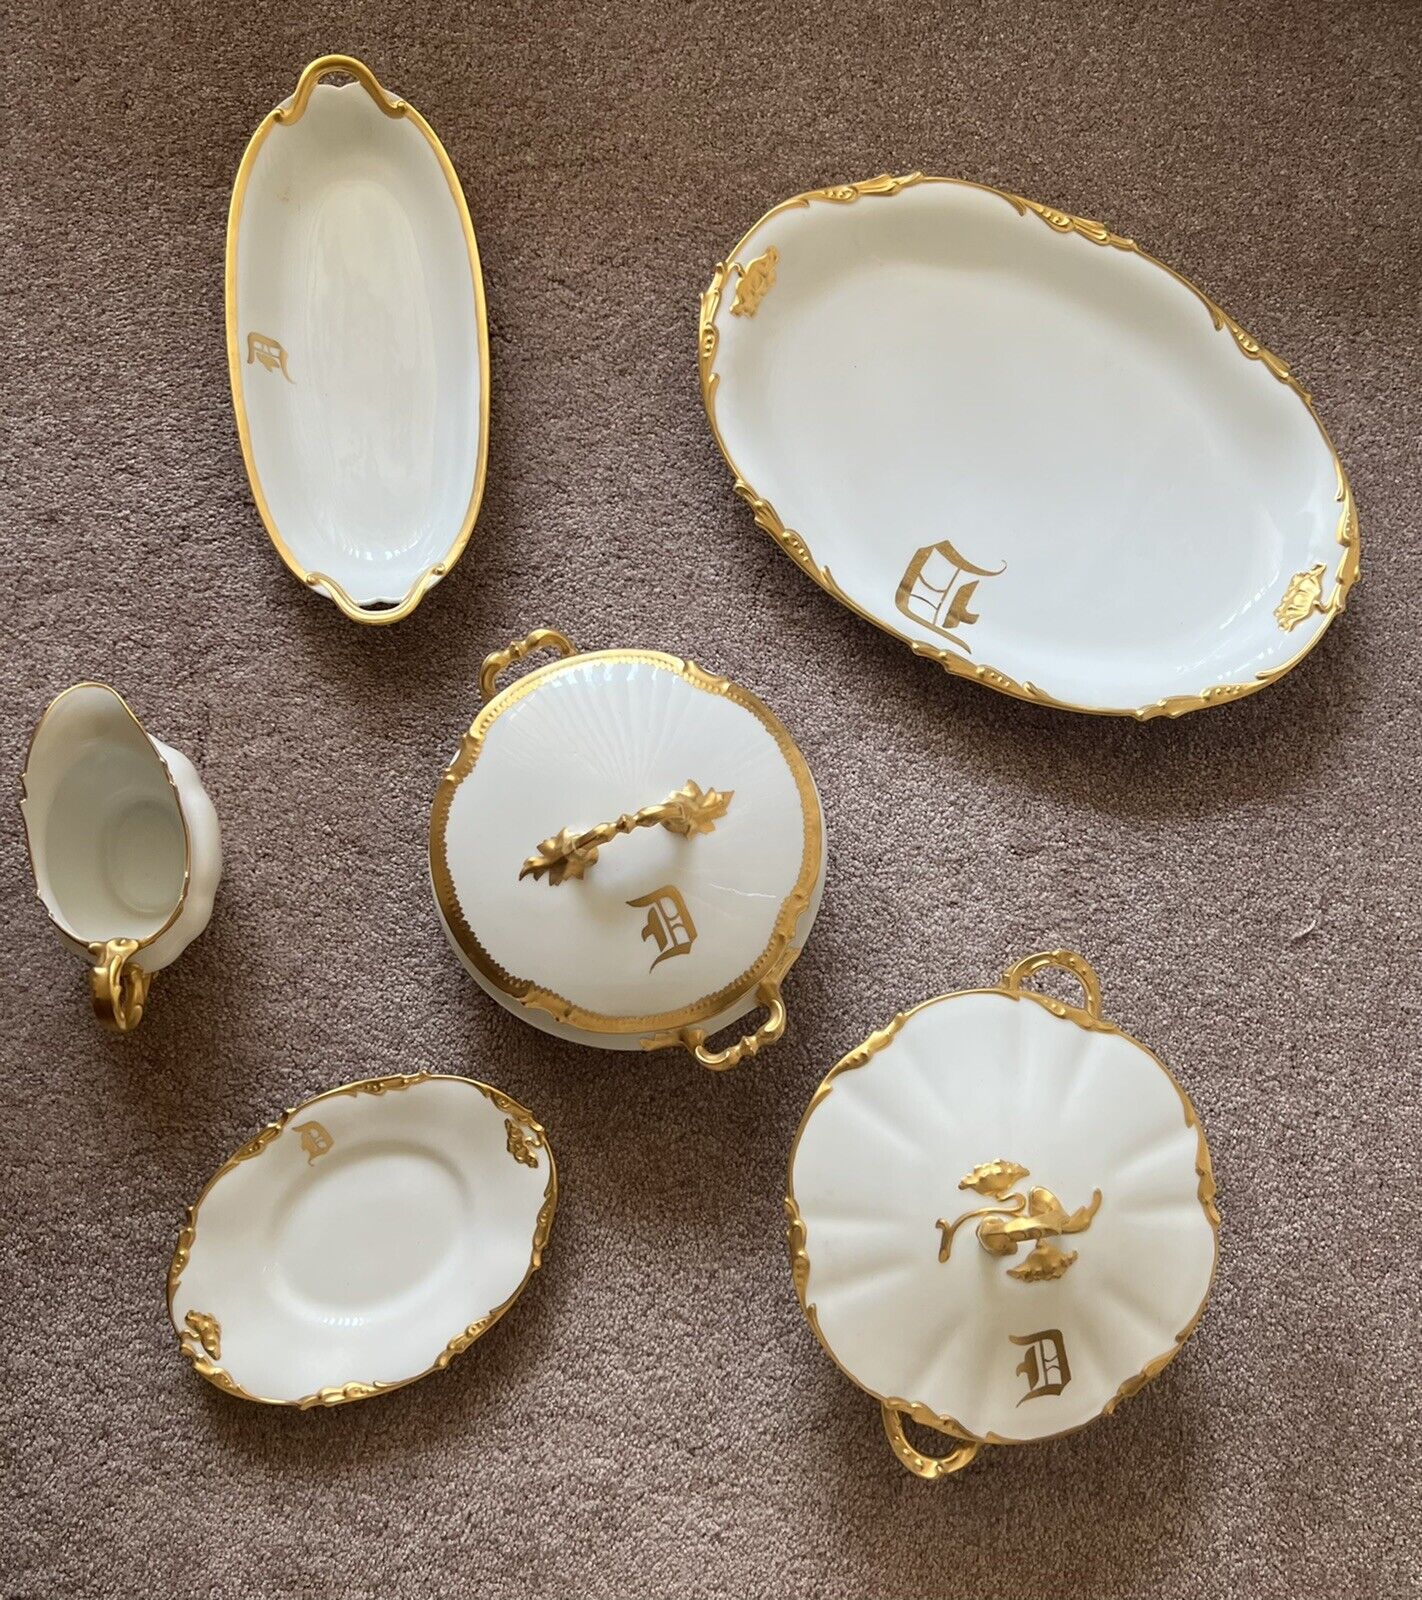 Antique French Dining Ware Ceramic & Gold Limoges